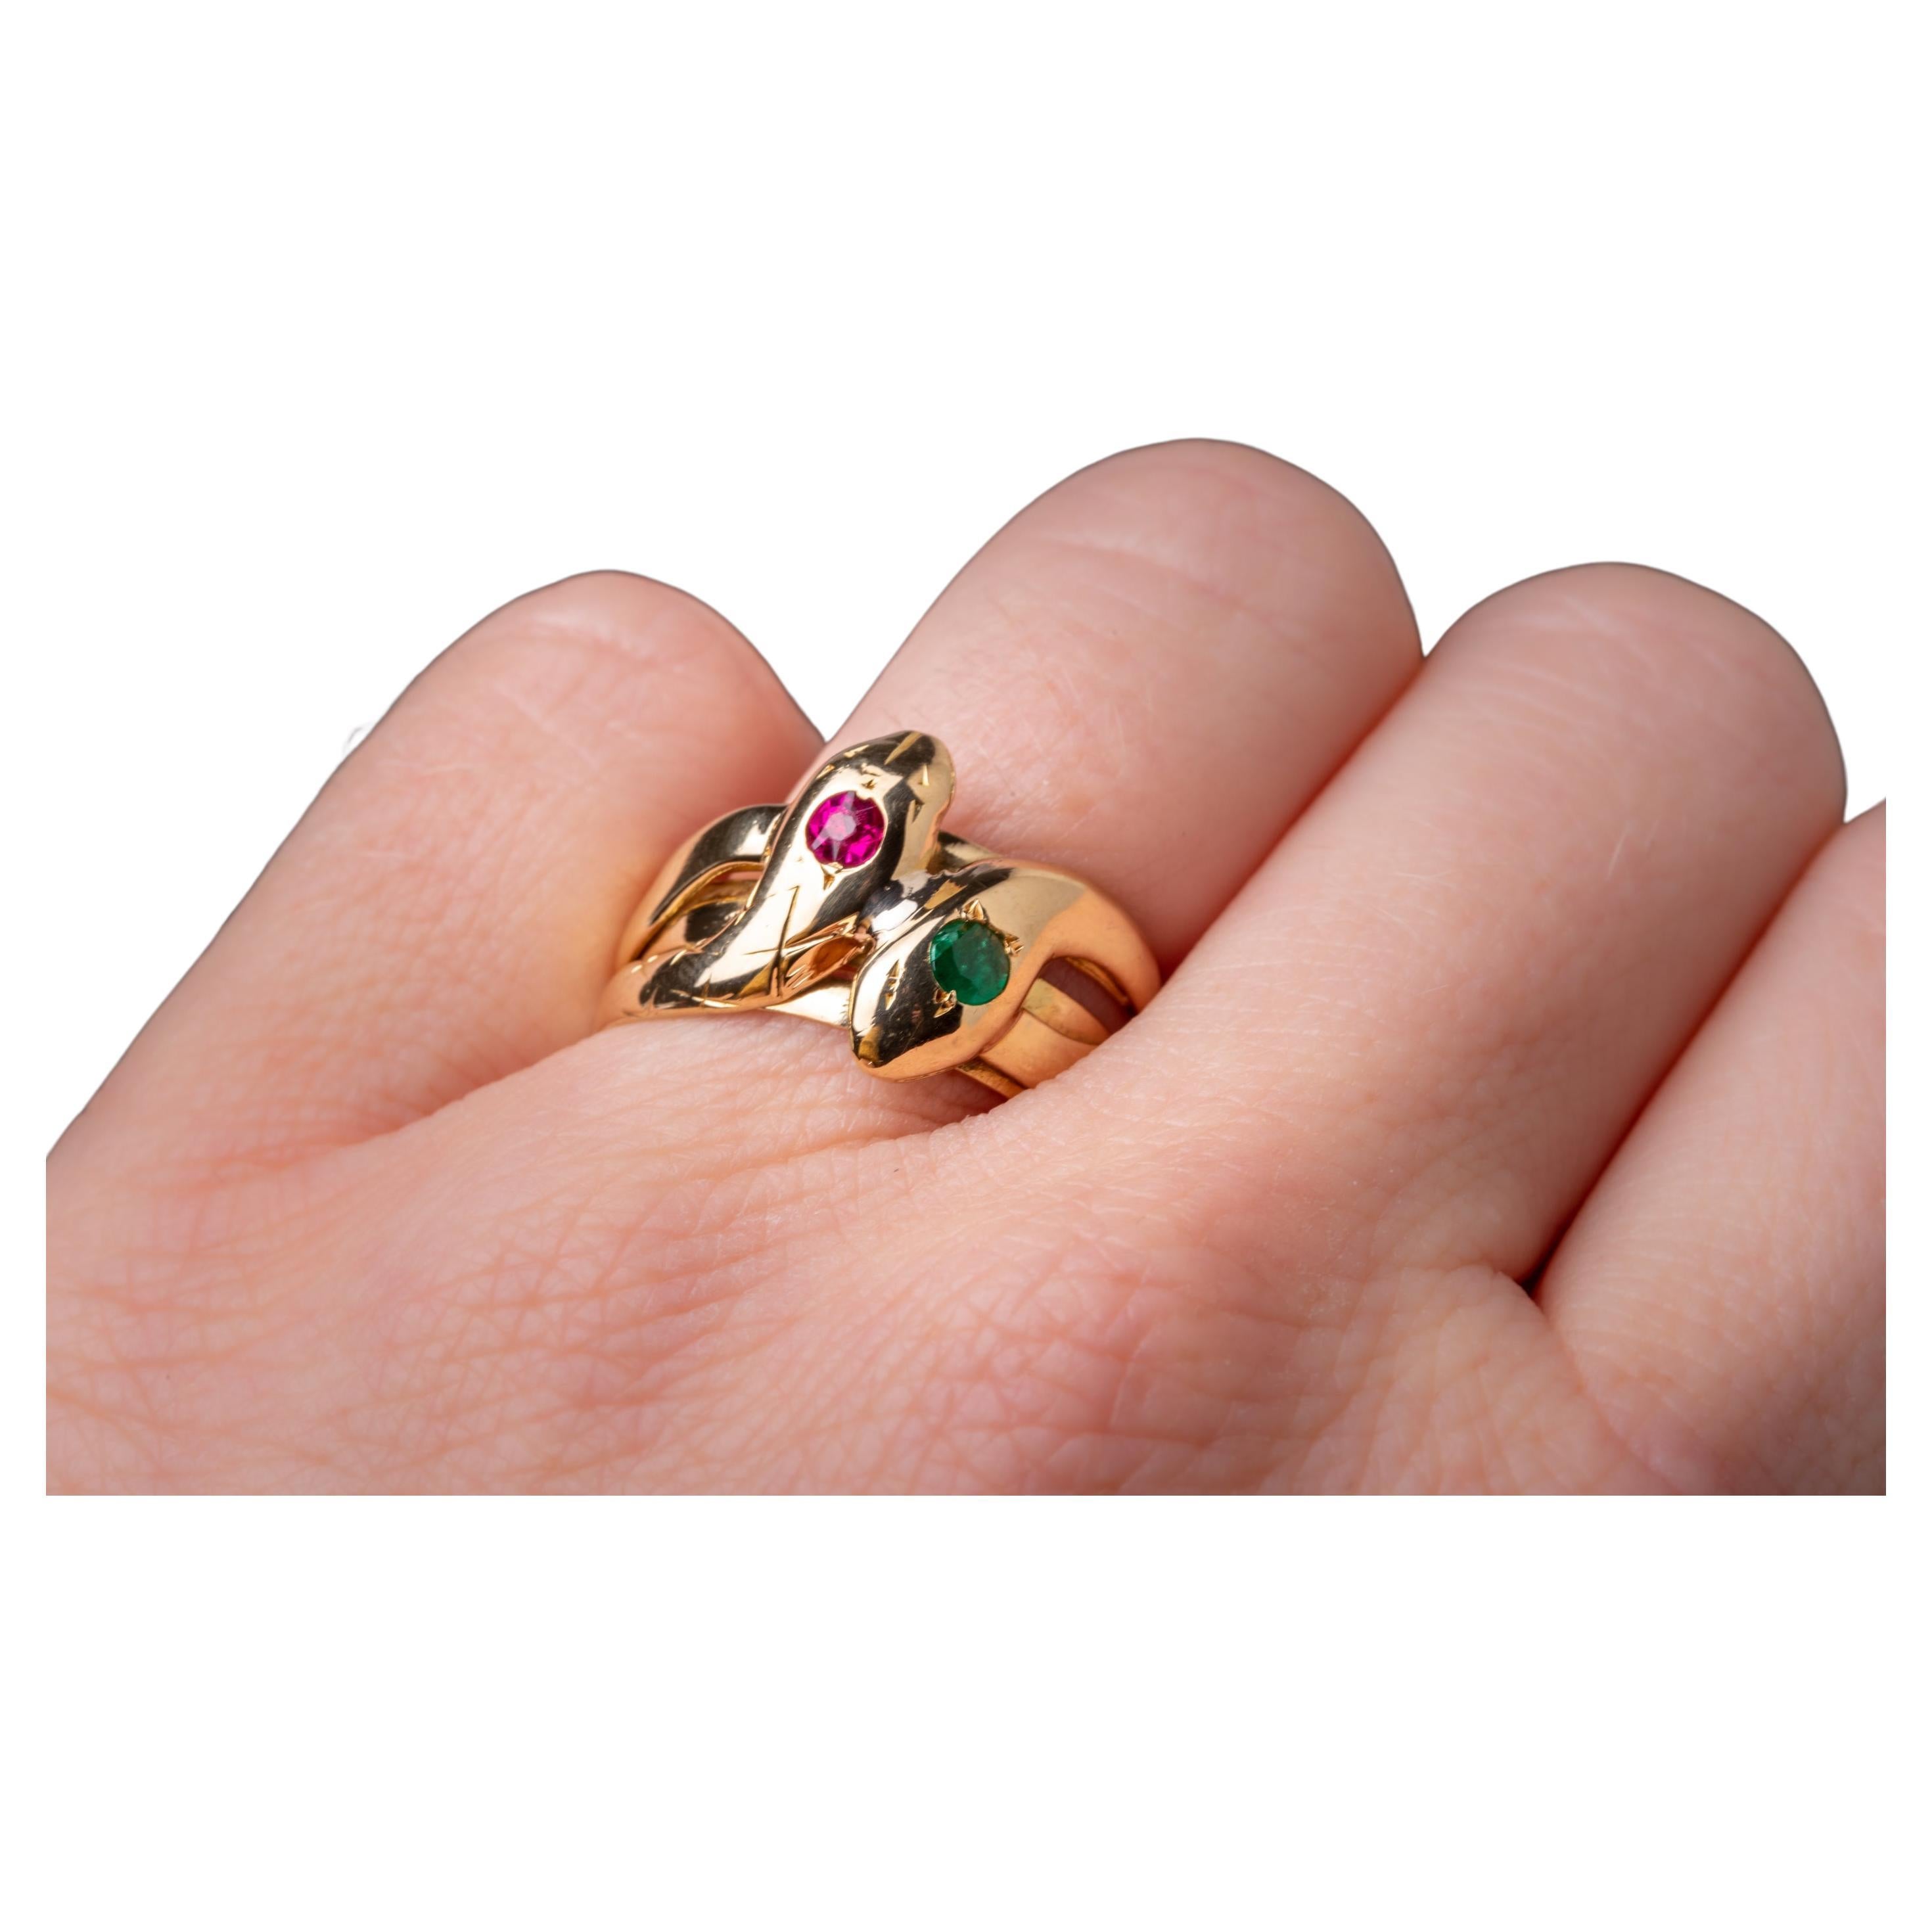 Antique Edwardian Emerald Snake Ring Double Headed Gold Ruby Snake Ring 1900s